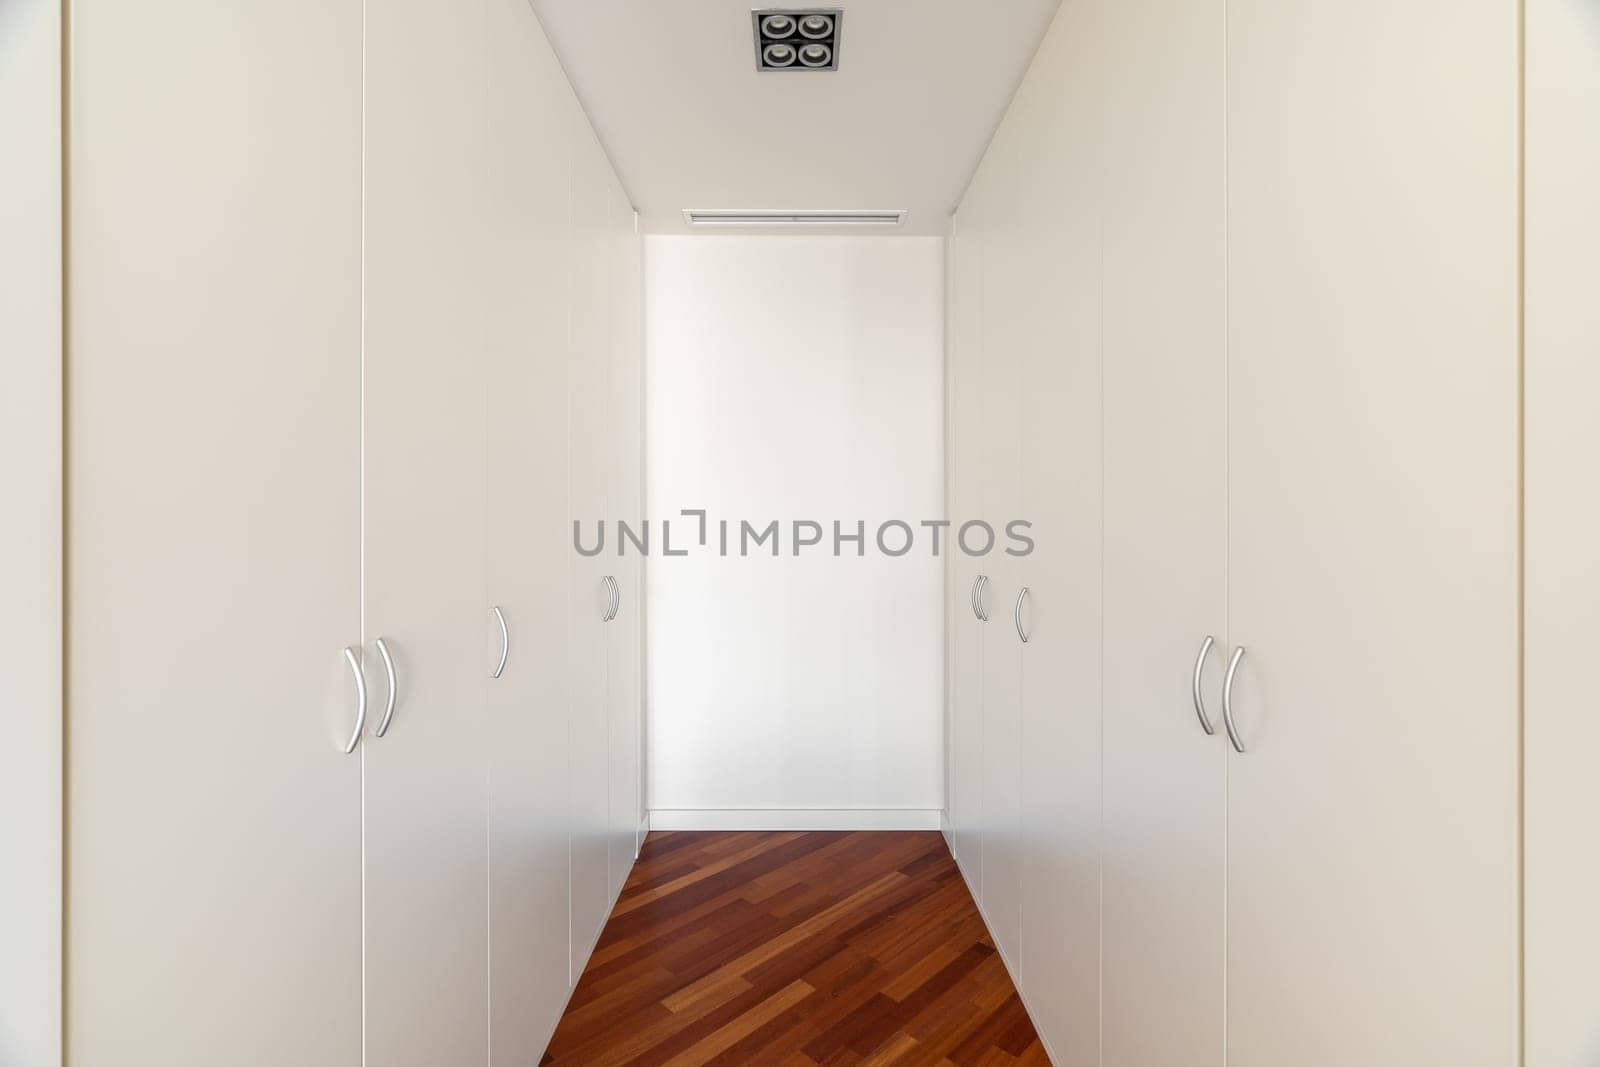 Dressing room area with built-in closets on both sides by apavlin